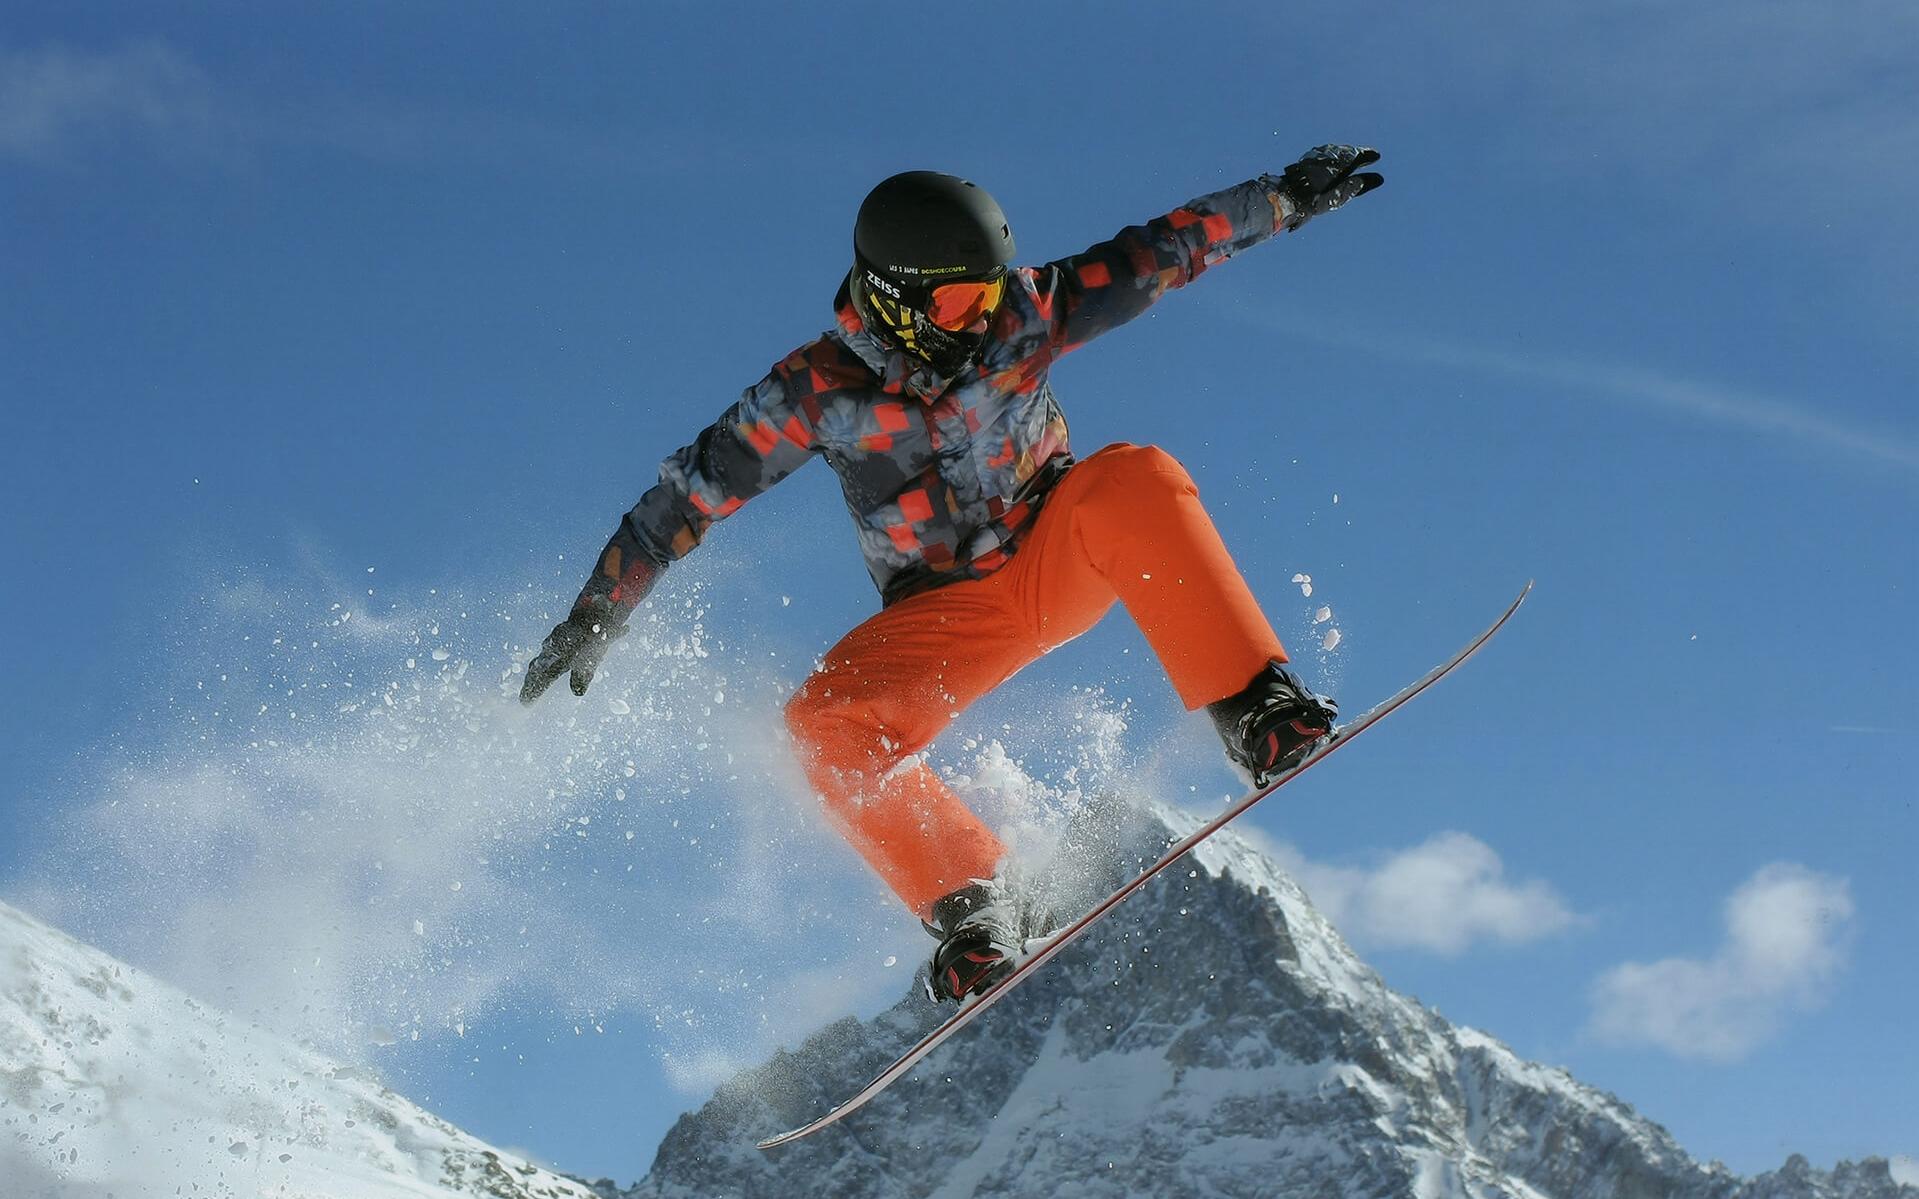 A convenient alternative for skiing and watersports: sports eyewear with your prescription or daily contact lenses.